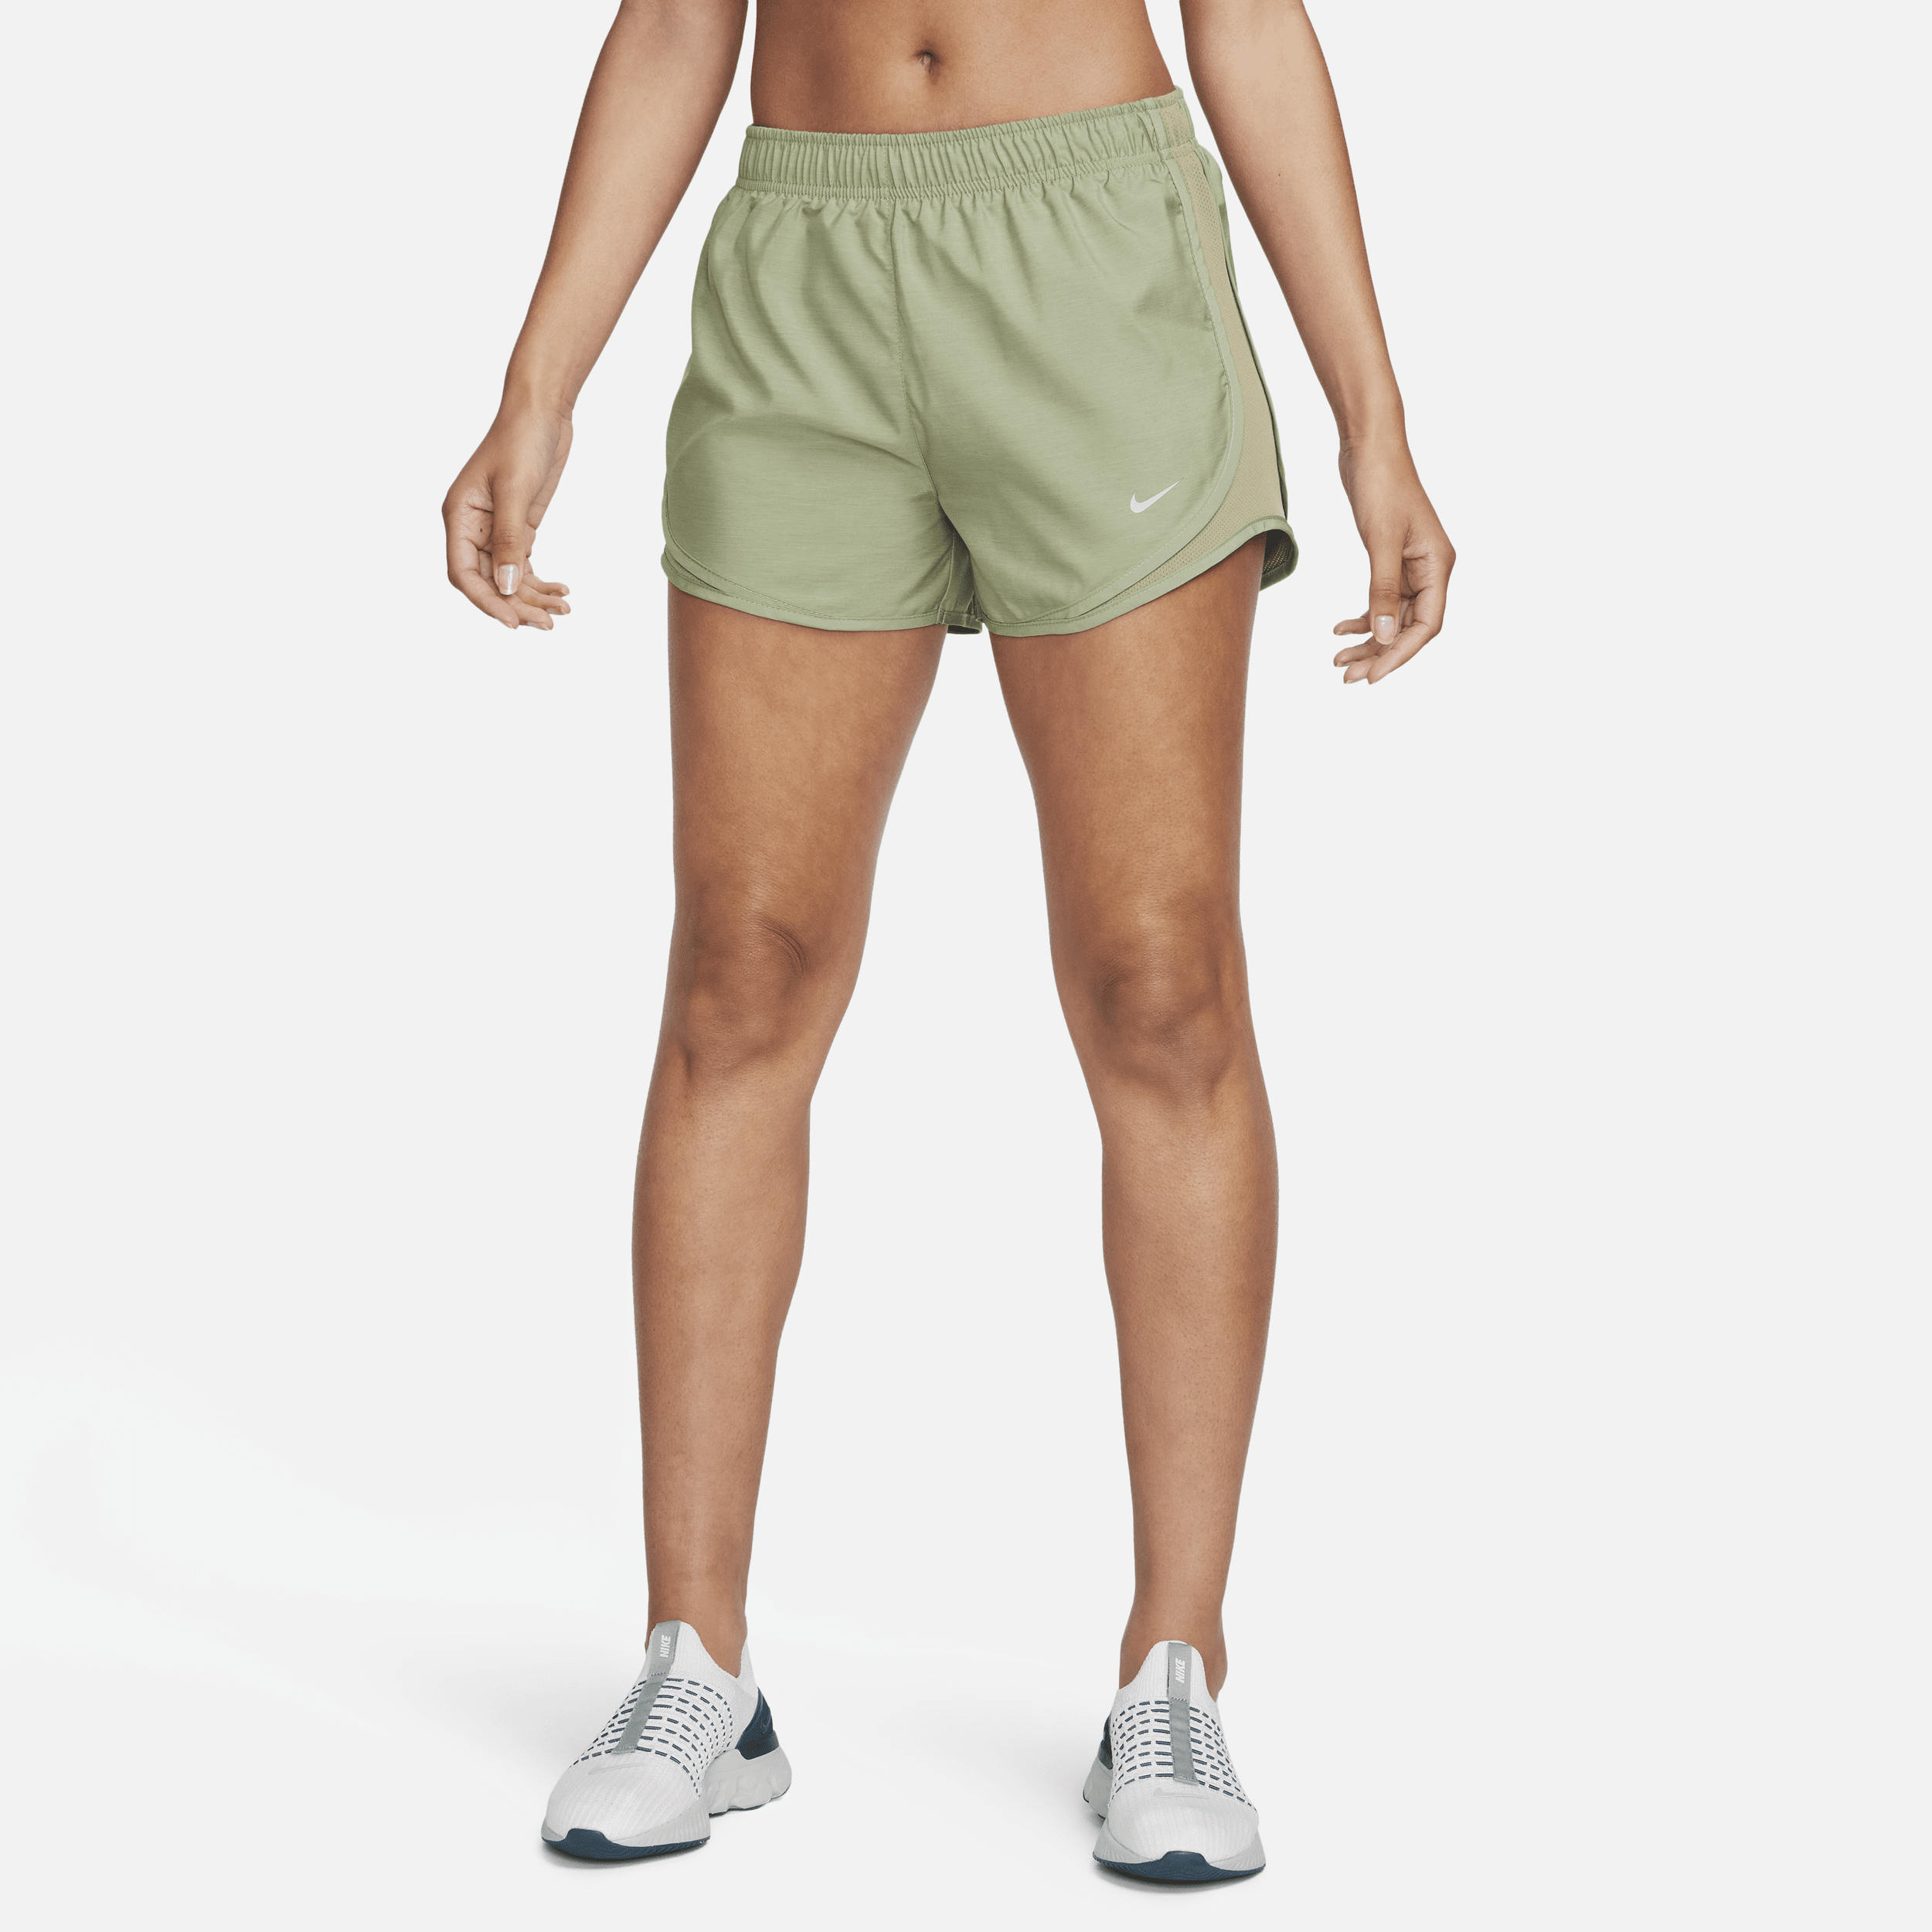 NIKE WOMEN'S TEMPO BRIEF-LINED RUNNING SHORTS,1012437599